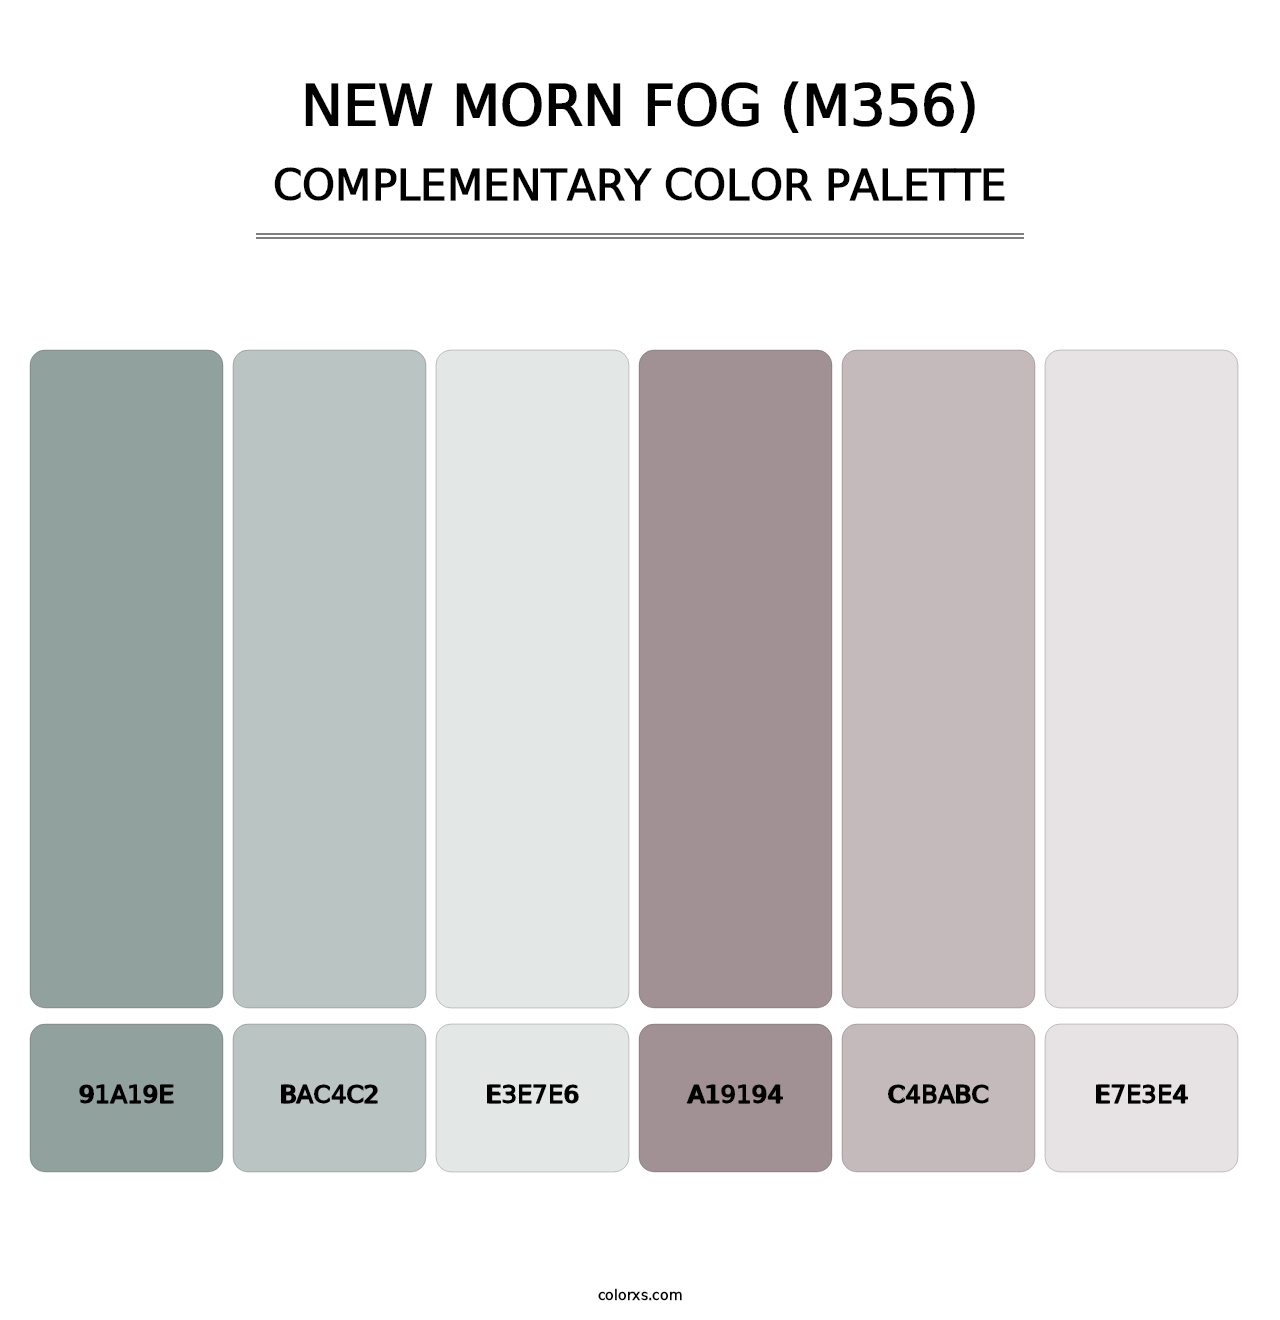 New Morn Fog (M356) - Complementary Color Palette